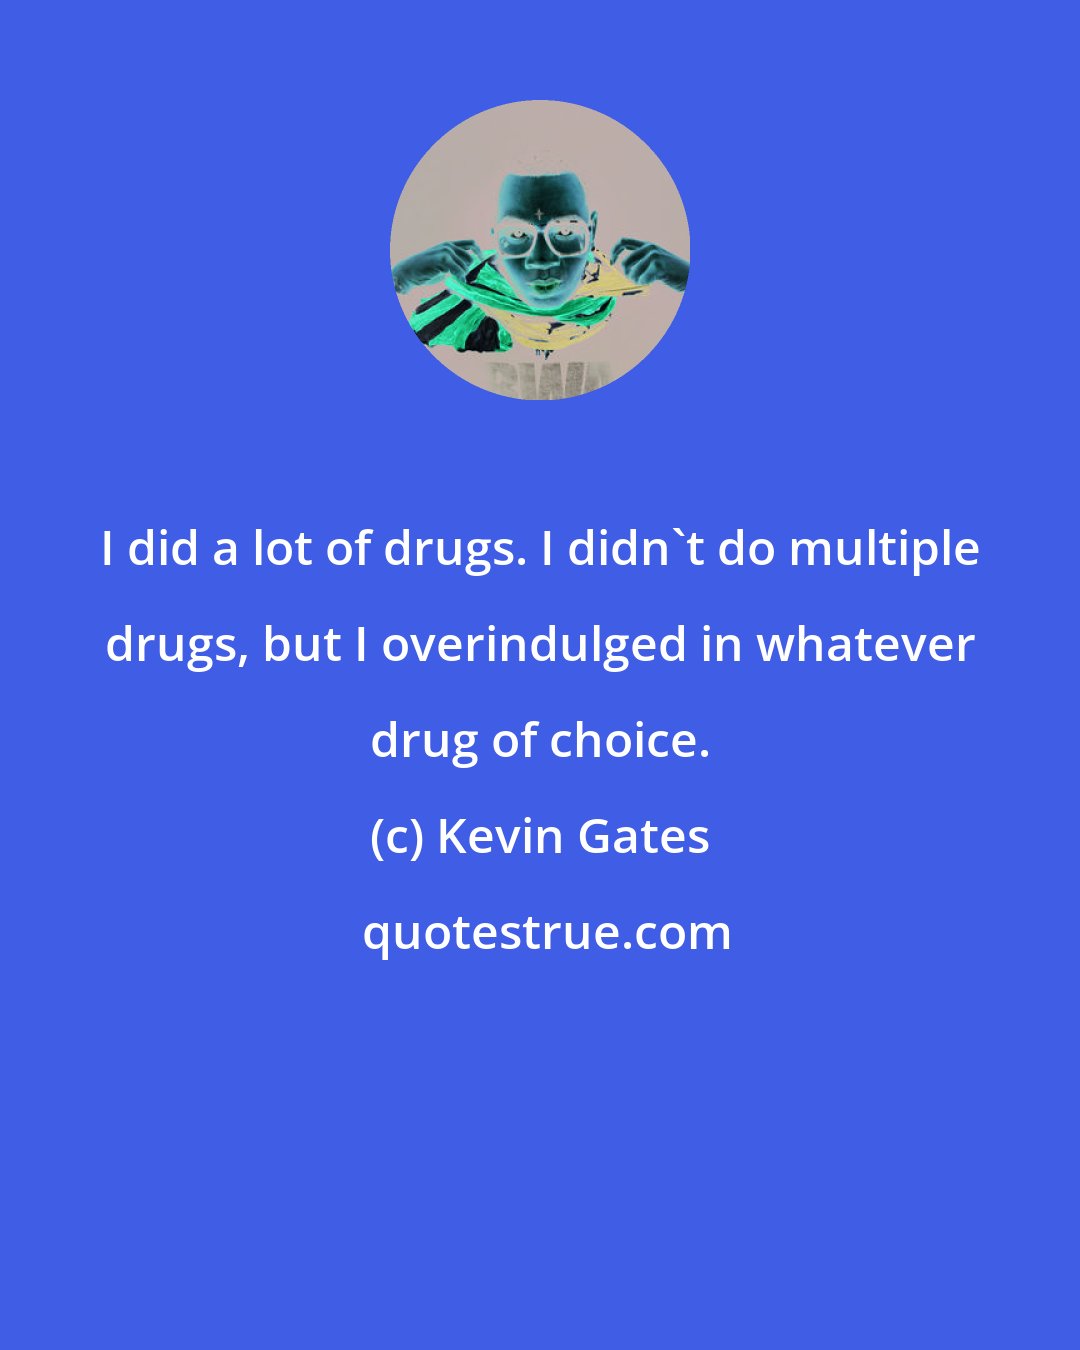 Kevin Gates: I did a lot of drugs. I didn't do multiple drugs, but I overindulged in whatever drug of choice.